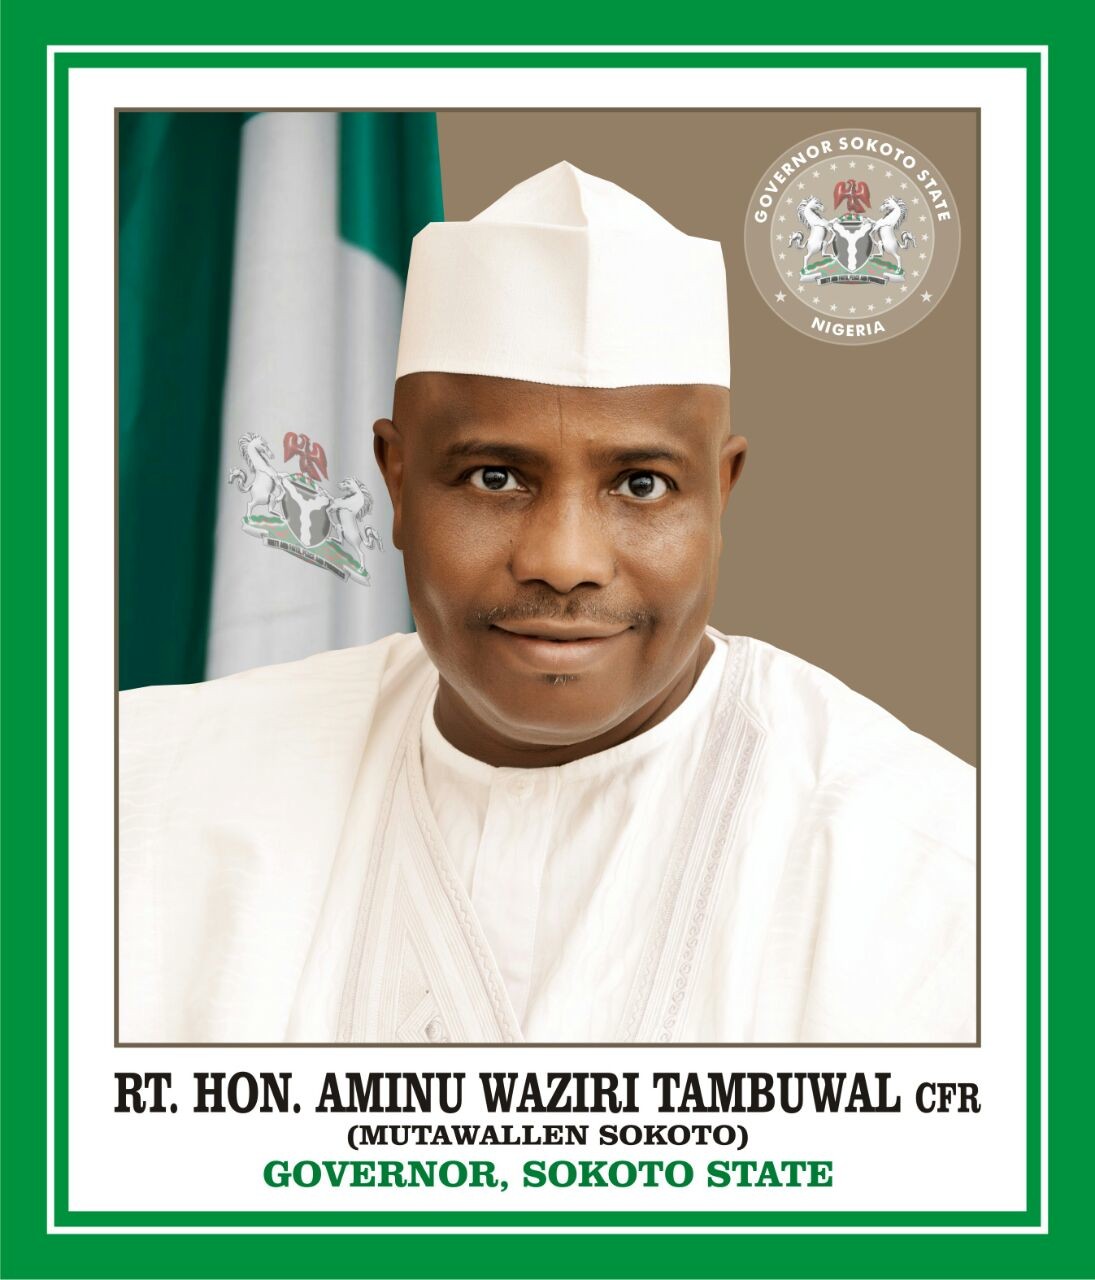 Time not yet ripe to declare my stand on 2019 – Tambuwal